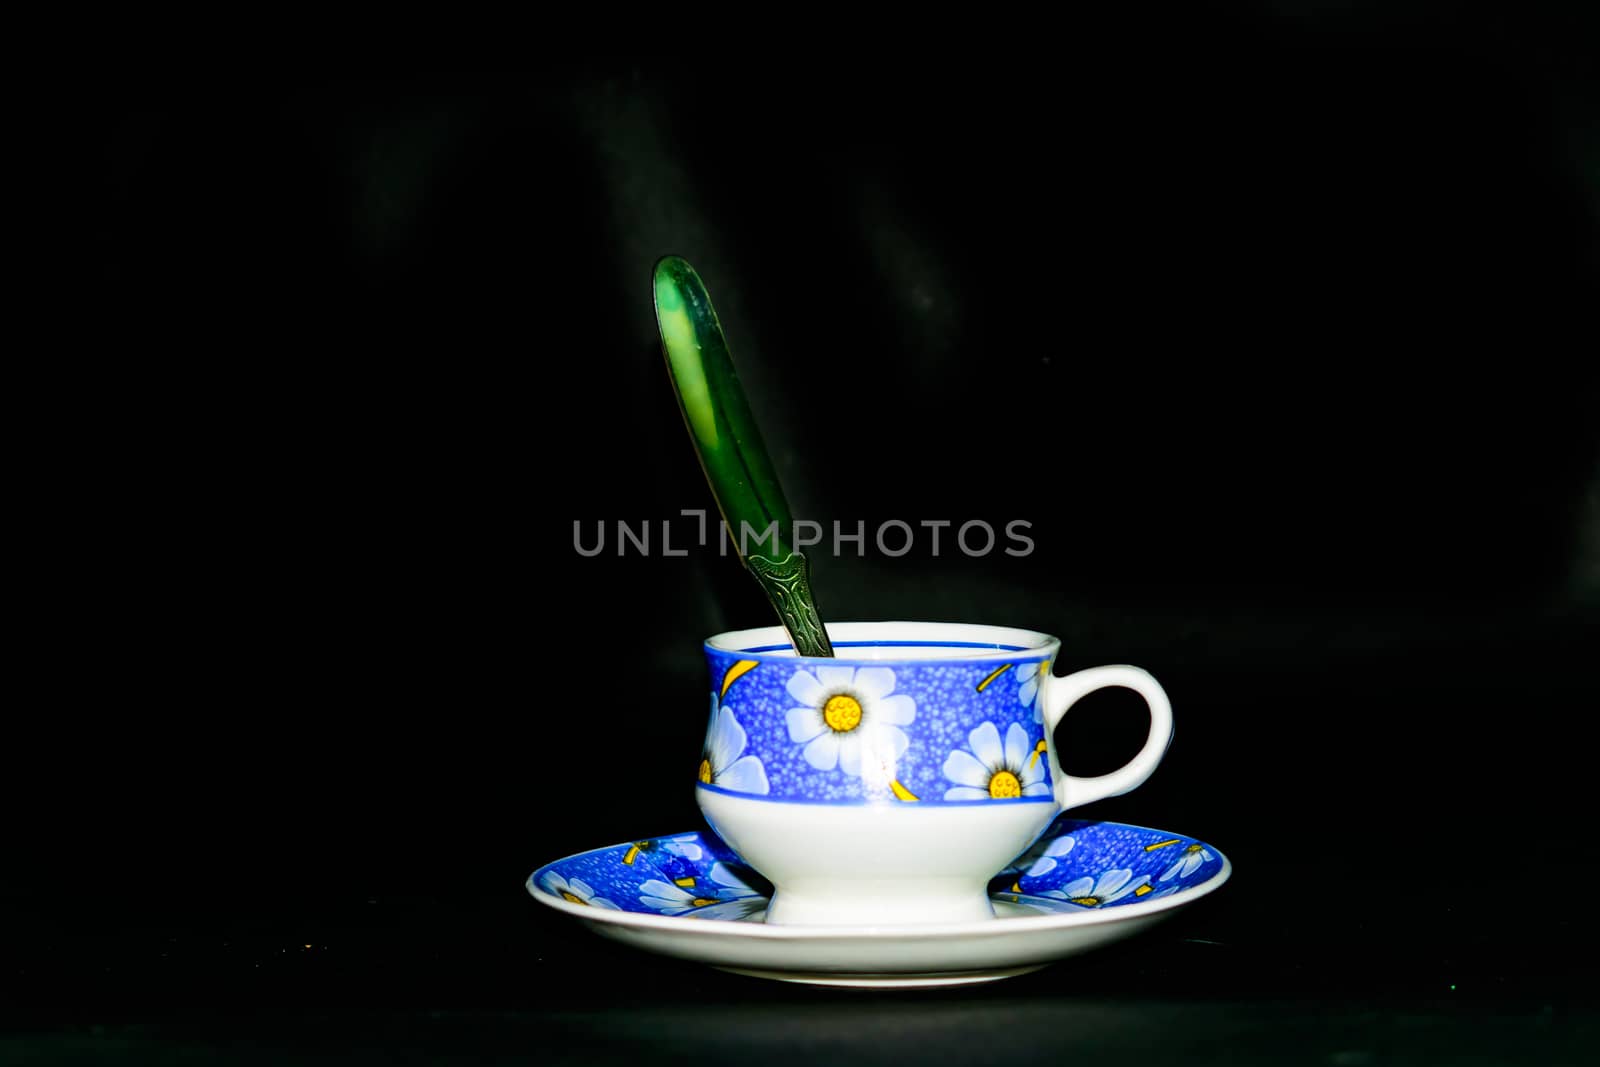 Single coffee cup on the plate with spoon in dark background